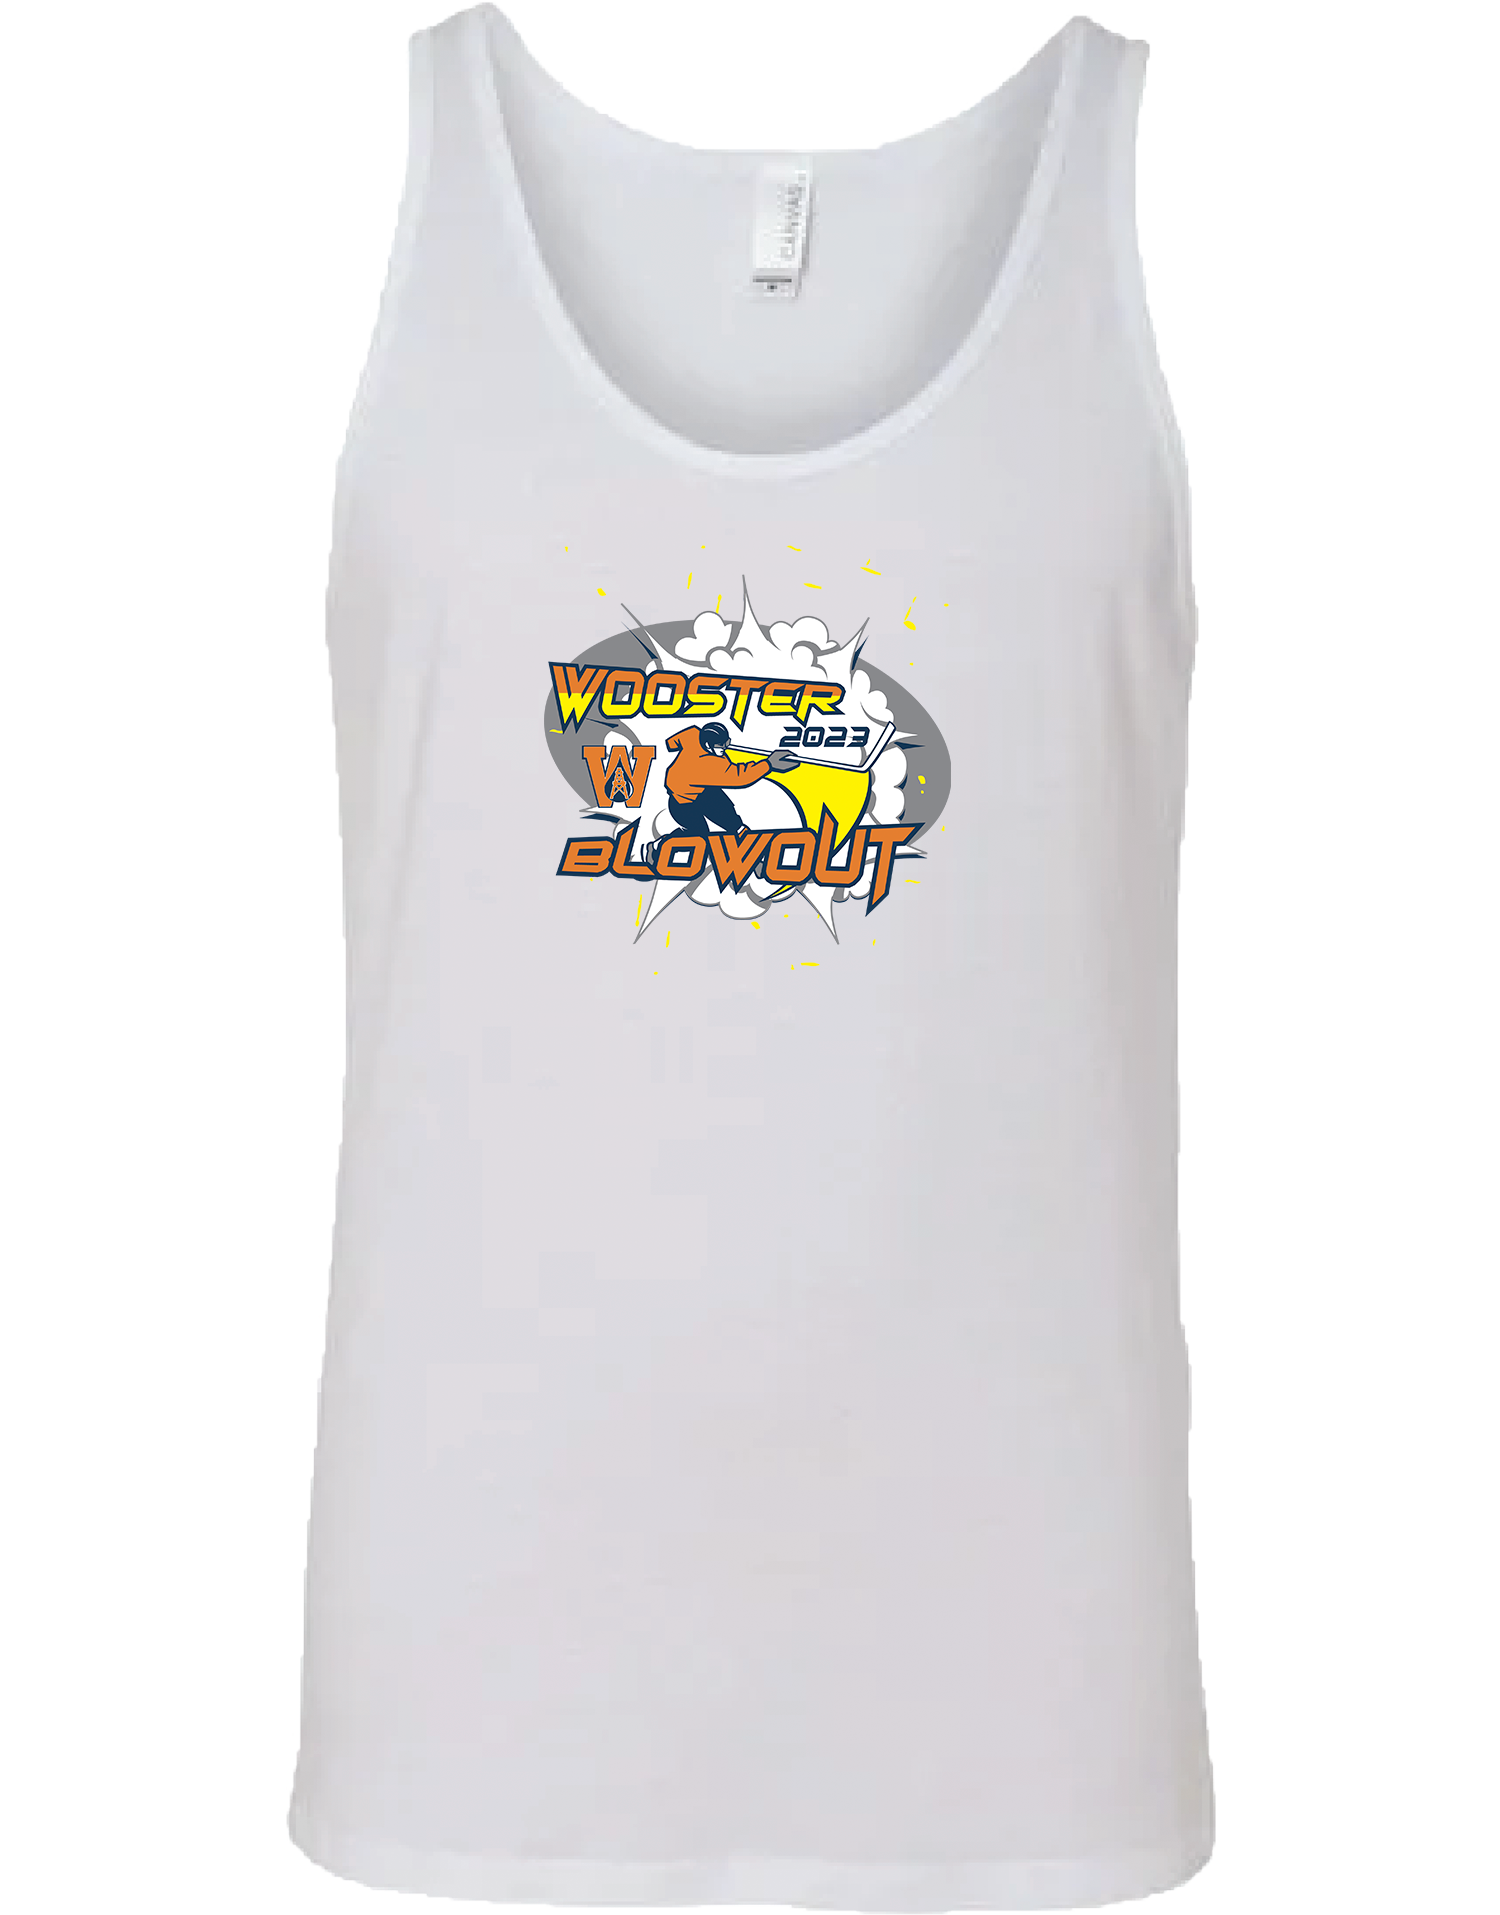 TANK TOP - 2023 Wooster Blowout